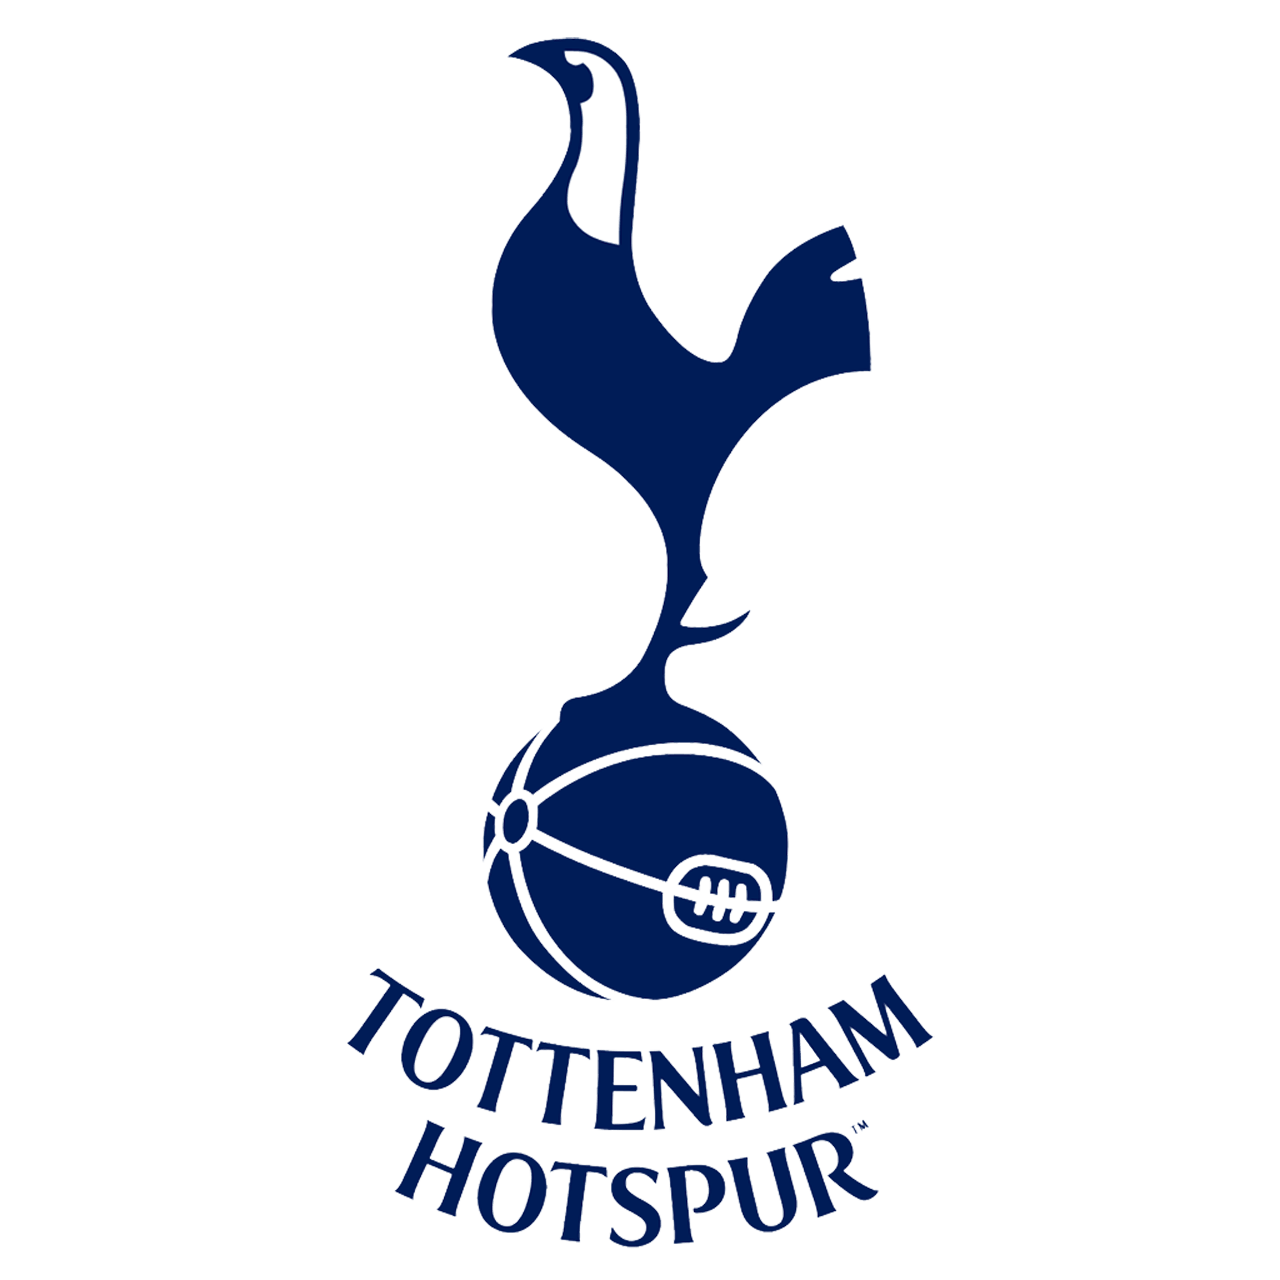 Tottenham Hotspur Logo - Tottenham Hotspur Logo transparent PNG - StickPNG